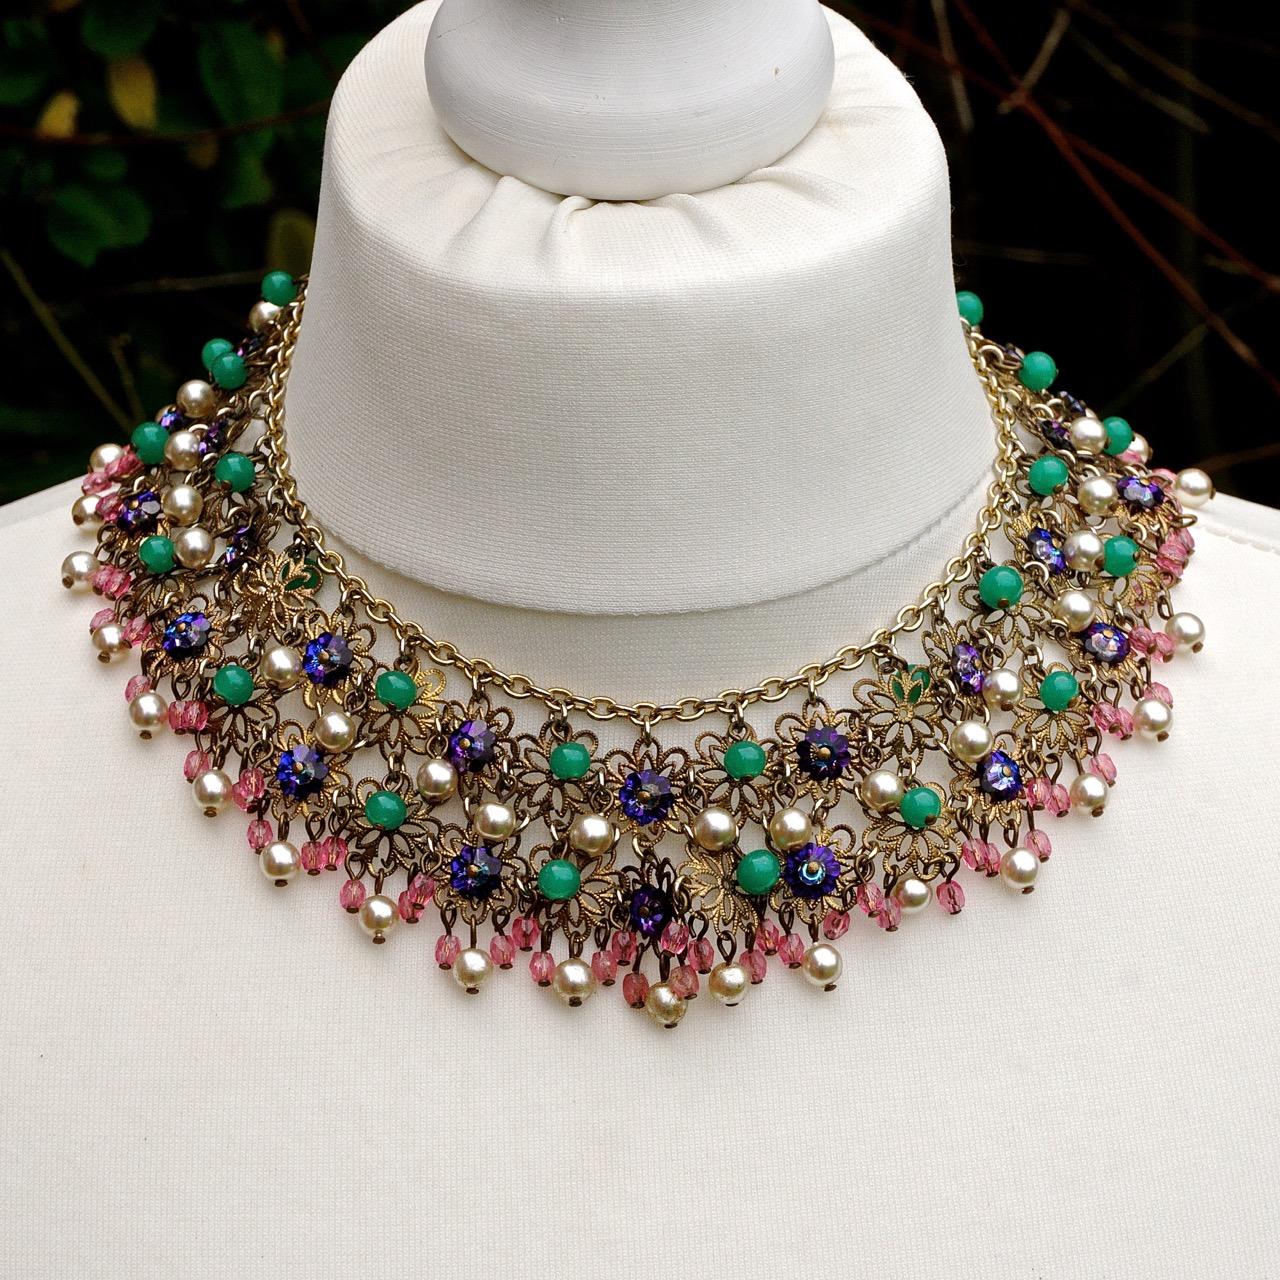 Fabulous detailed glass bead and faux pearl collar necklace. The glass beads are faceted pink beads, round green beads, purple flat beads, and faux pearl beads. They are attached to two rows of gold tone filigree flowers, which are held together at